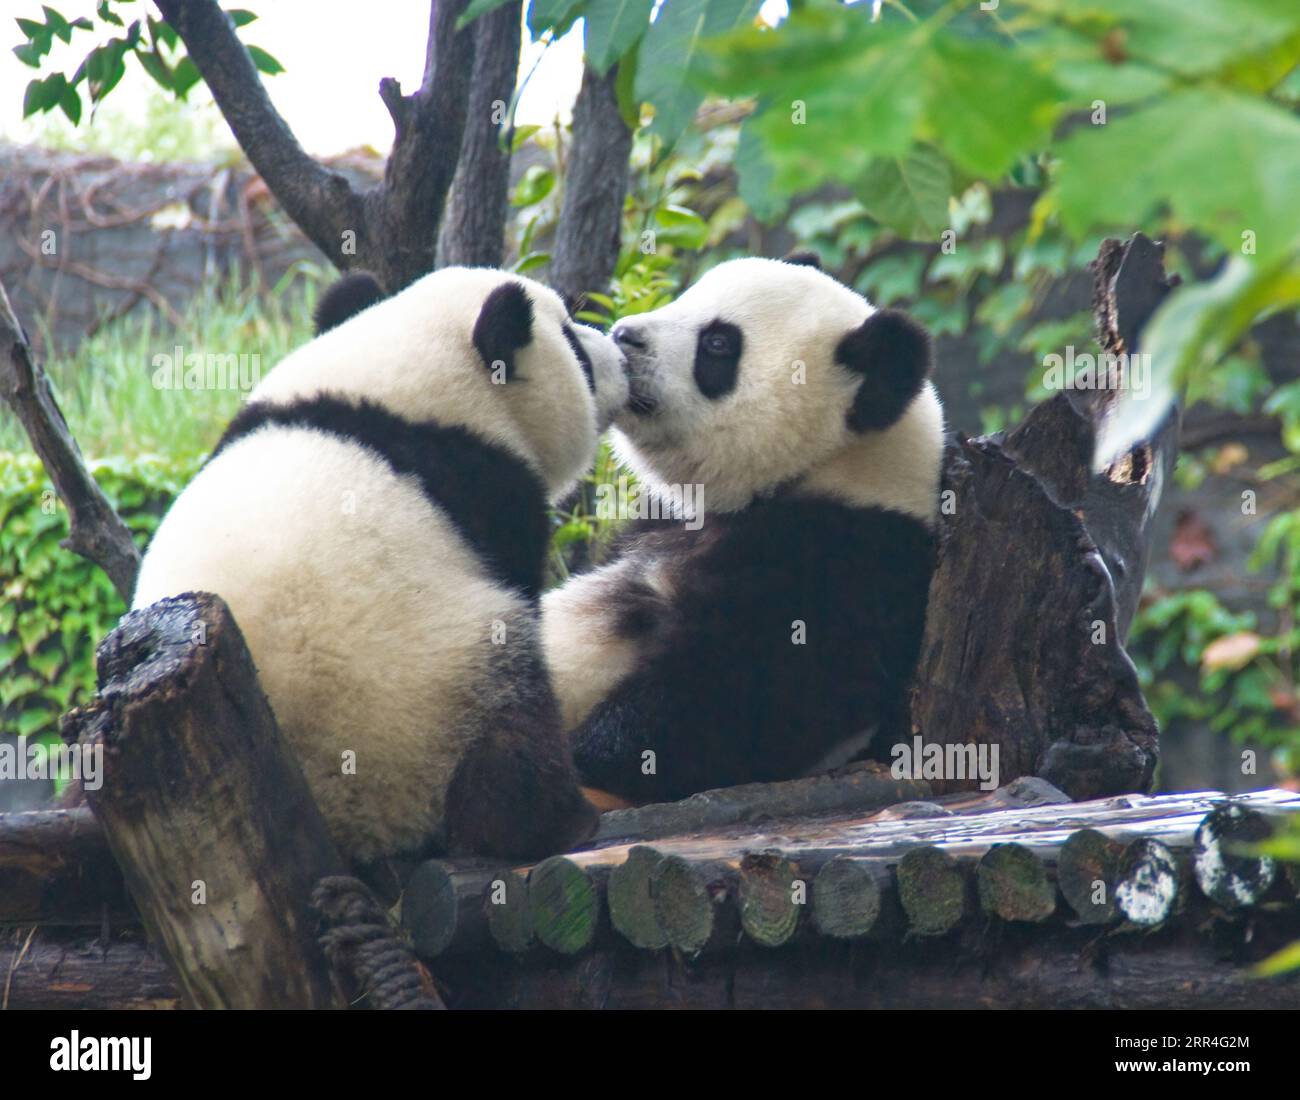 Giant pandas appear to be kissing in the Wolong Nature Reserve in Sichuan, China. Stock Photo